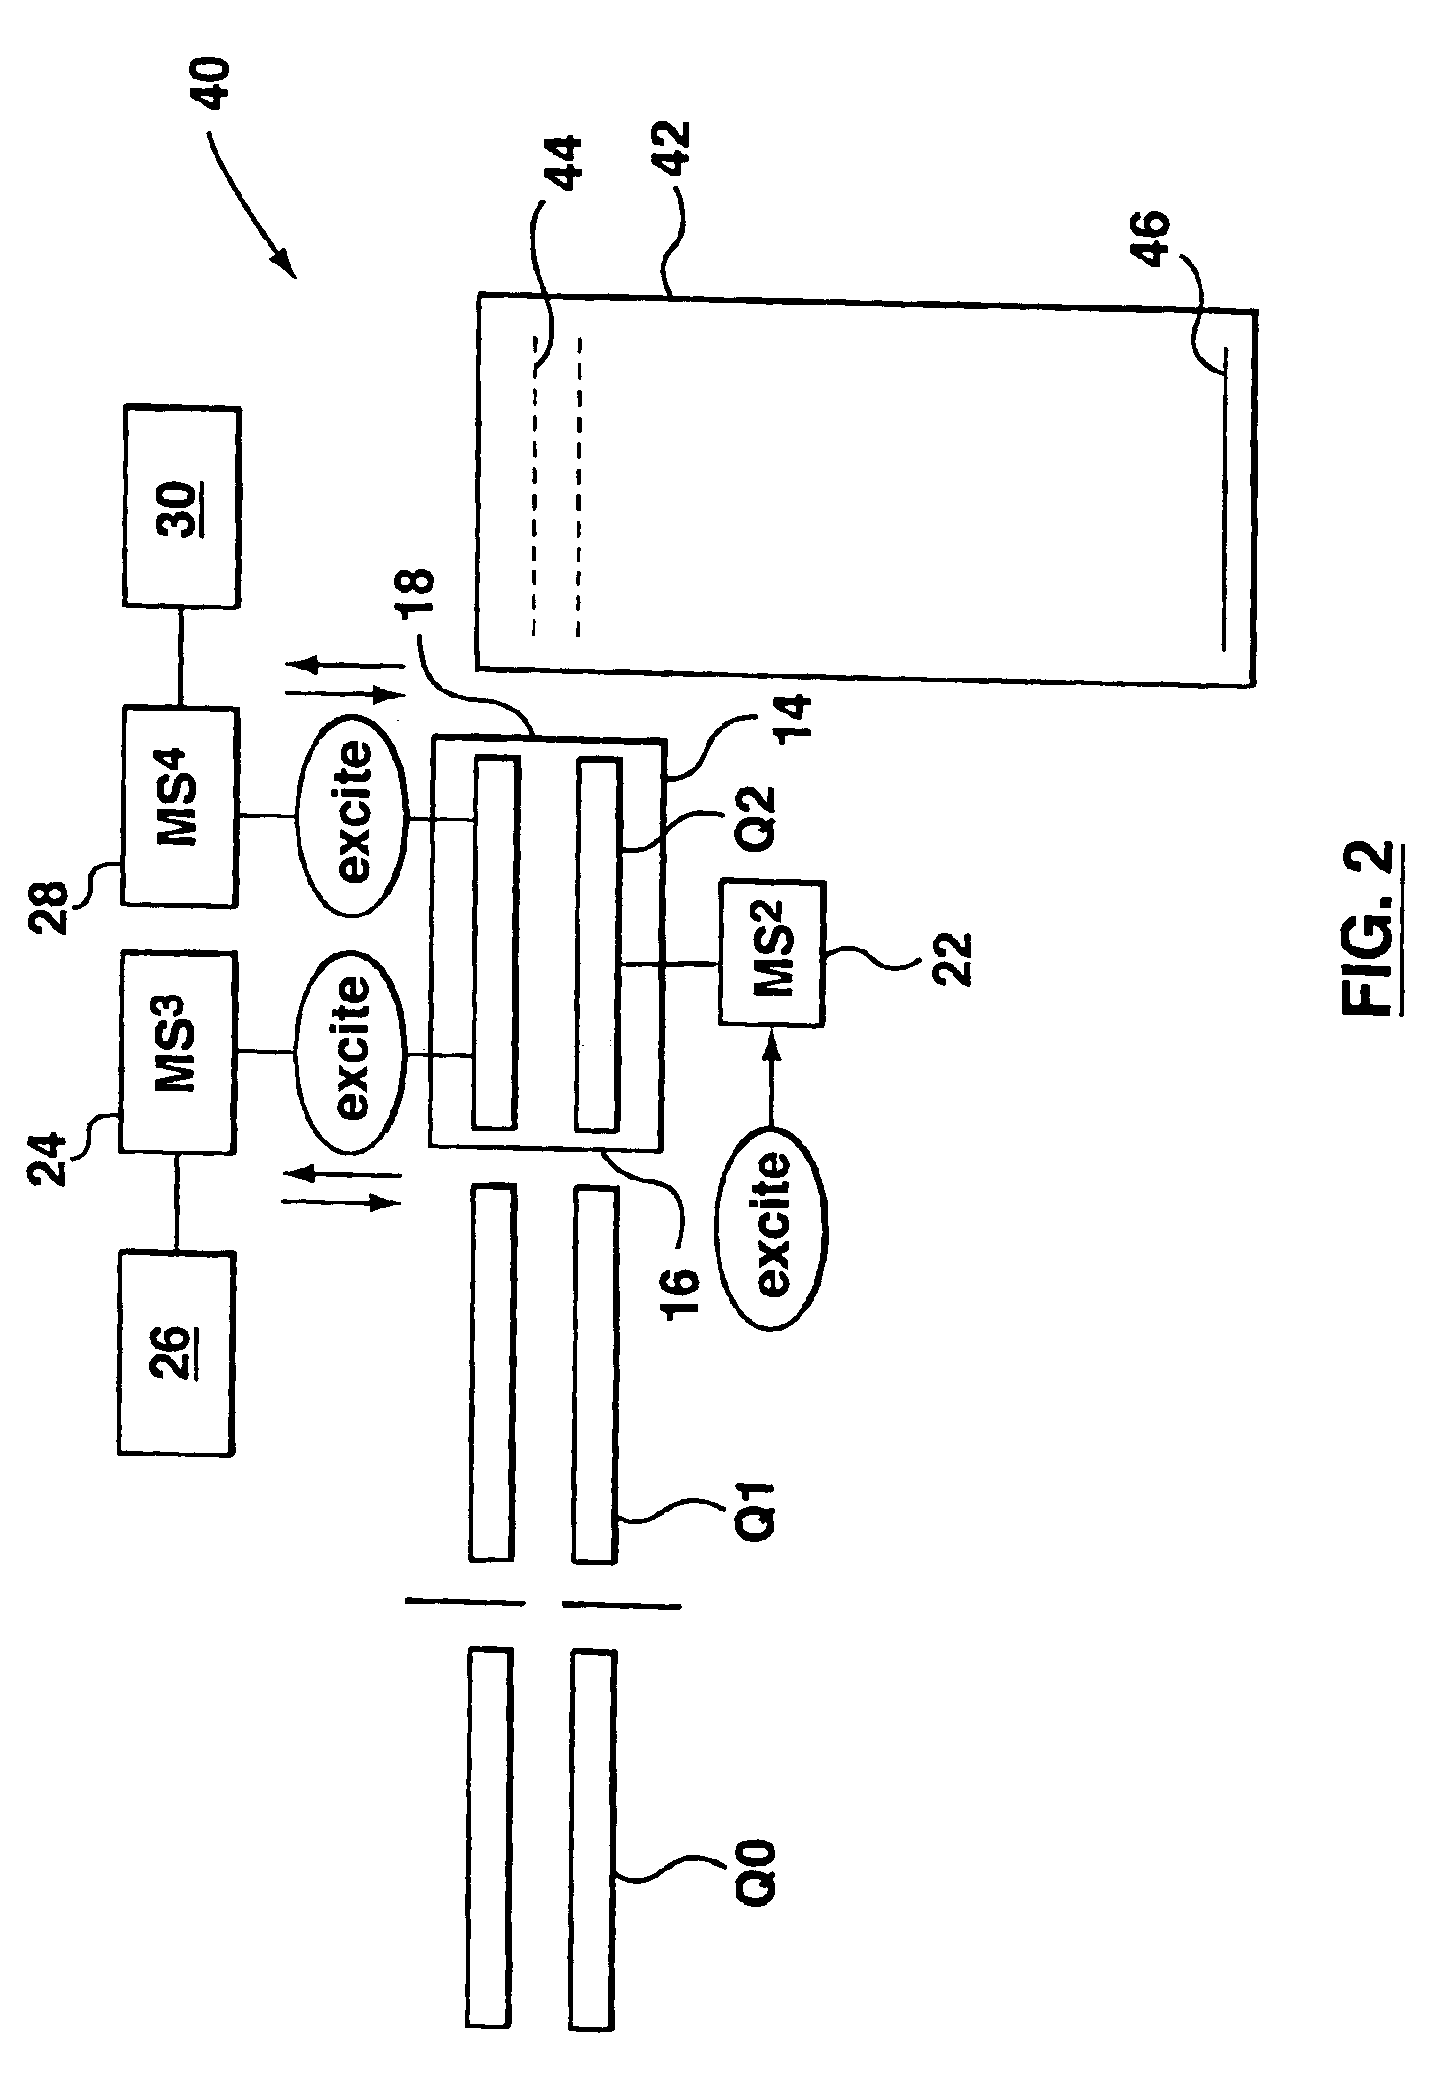 Method and apparatus for analyzing a substance using MSn analysis